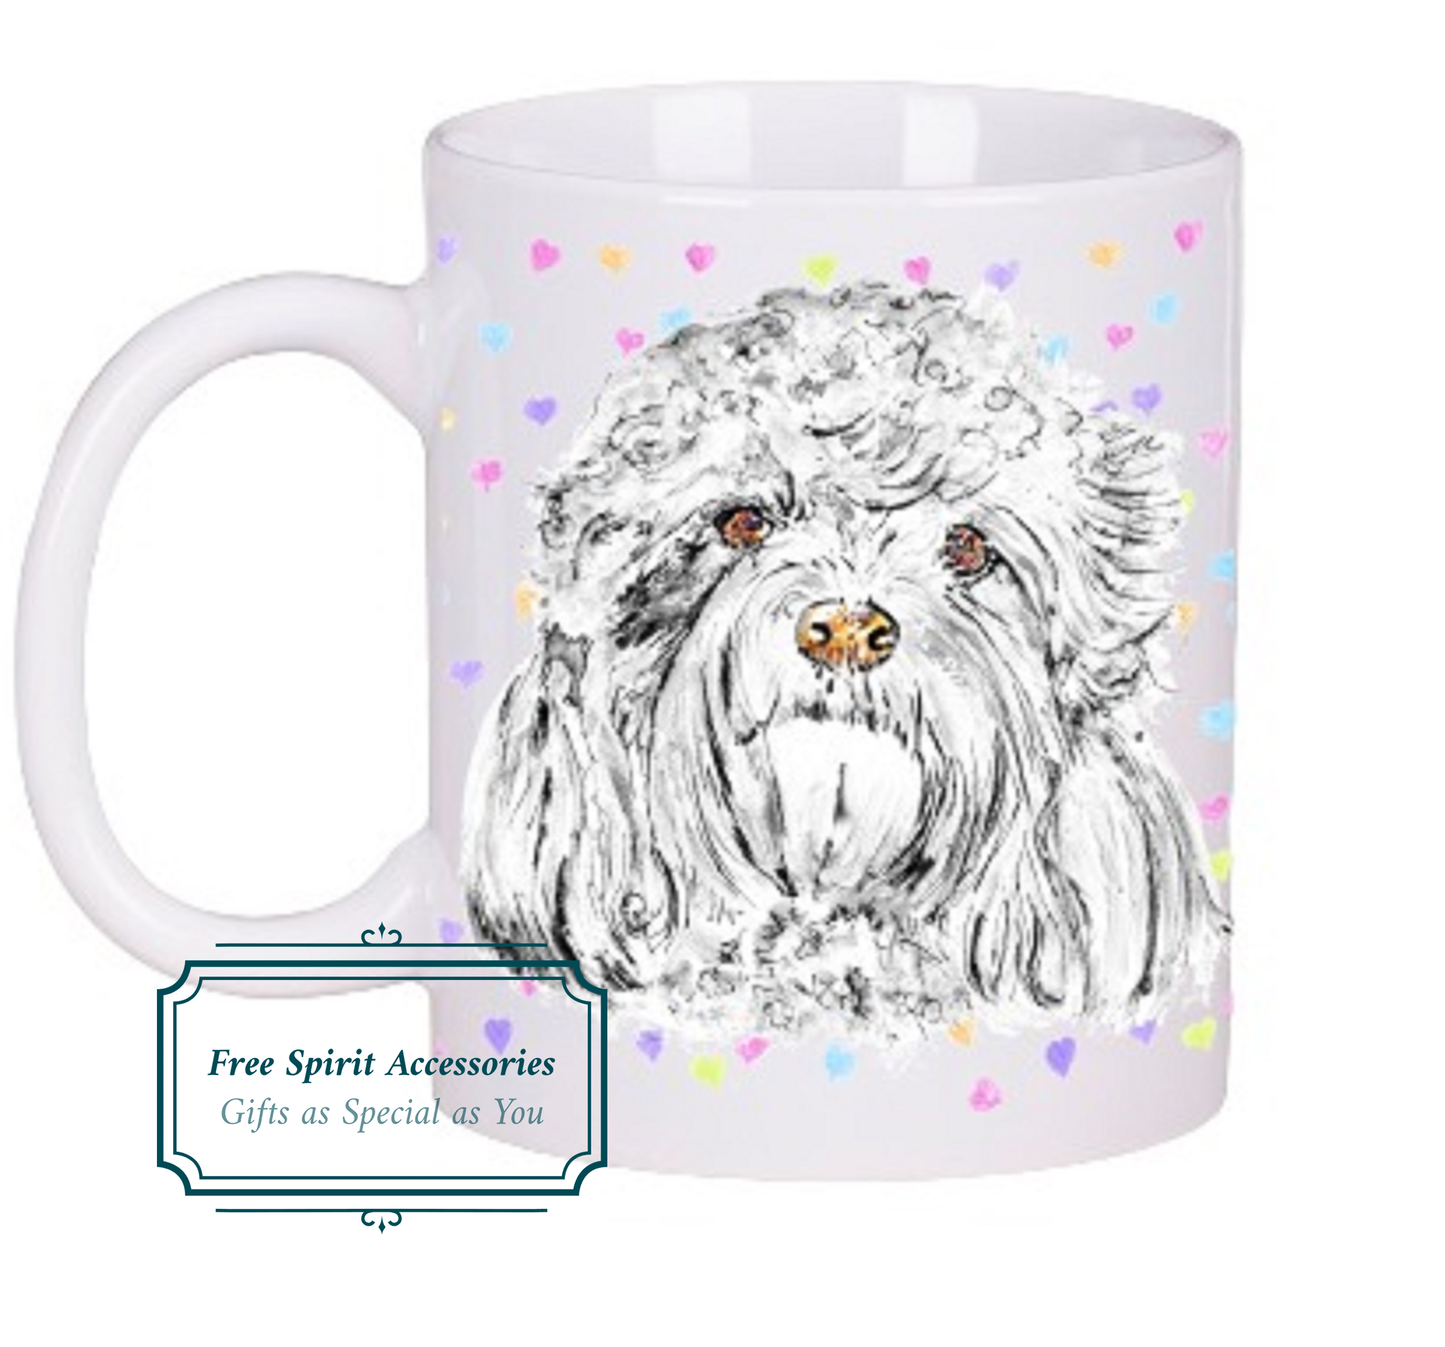  Cavapoo Dog With Hearts Background Mug by Free Spirit Accessories sold by Free Spirit Accessories